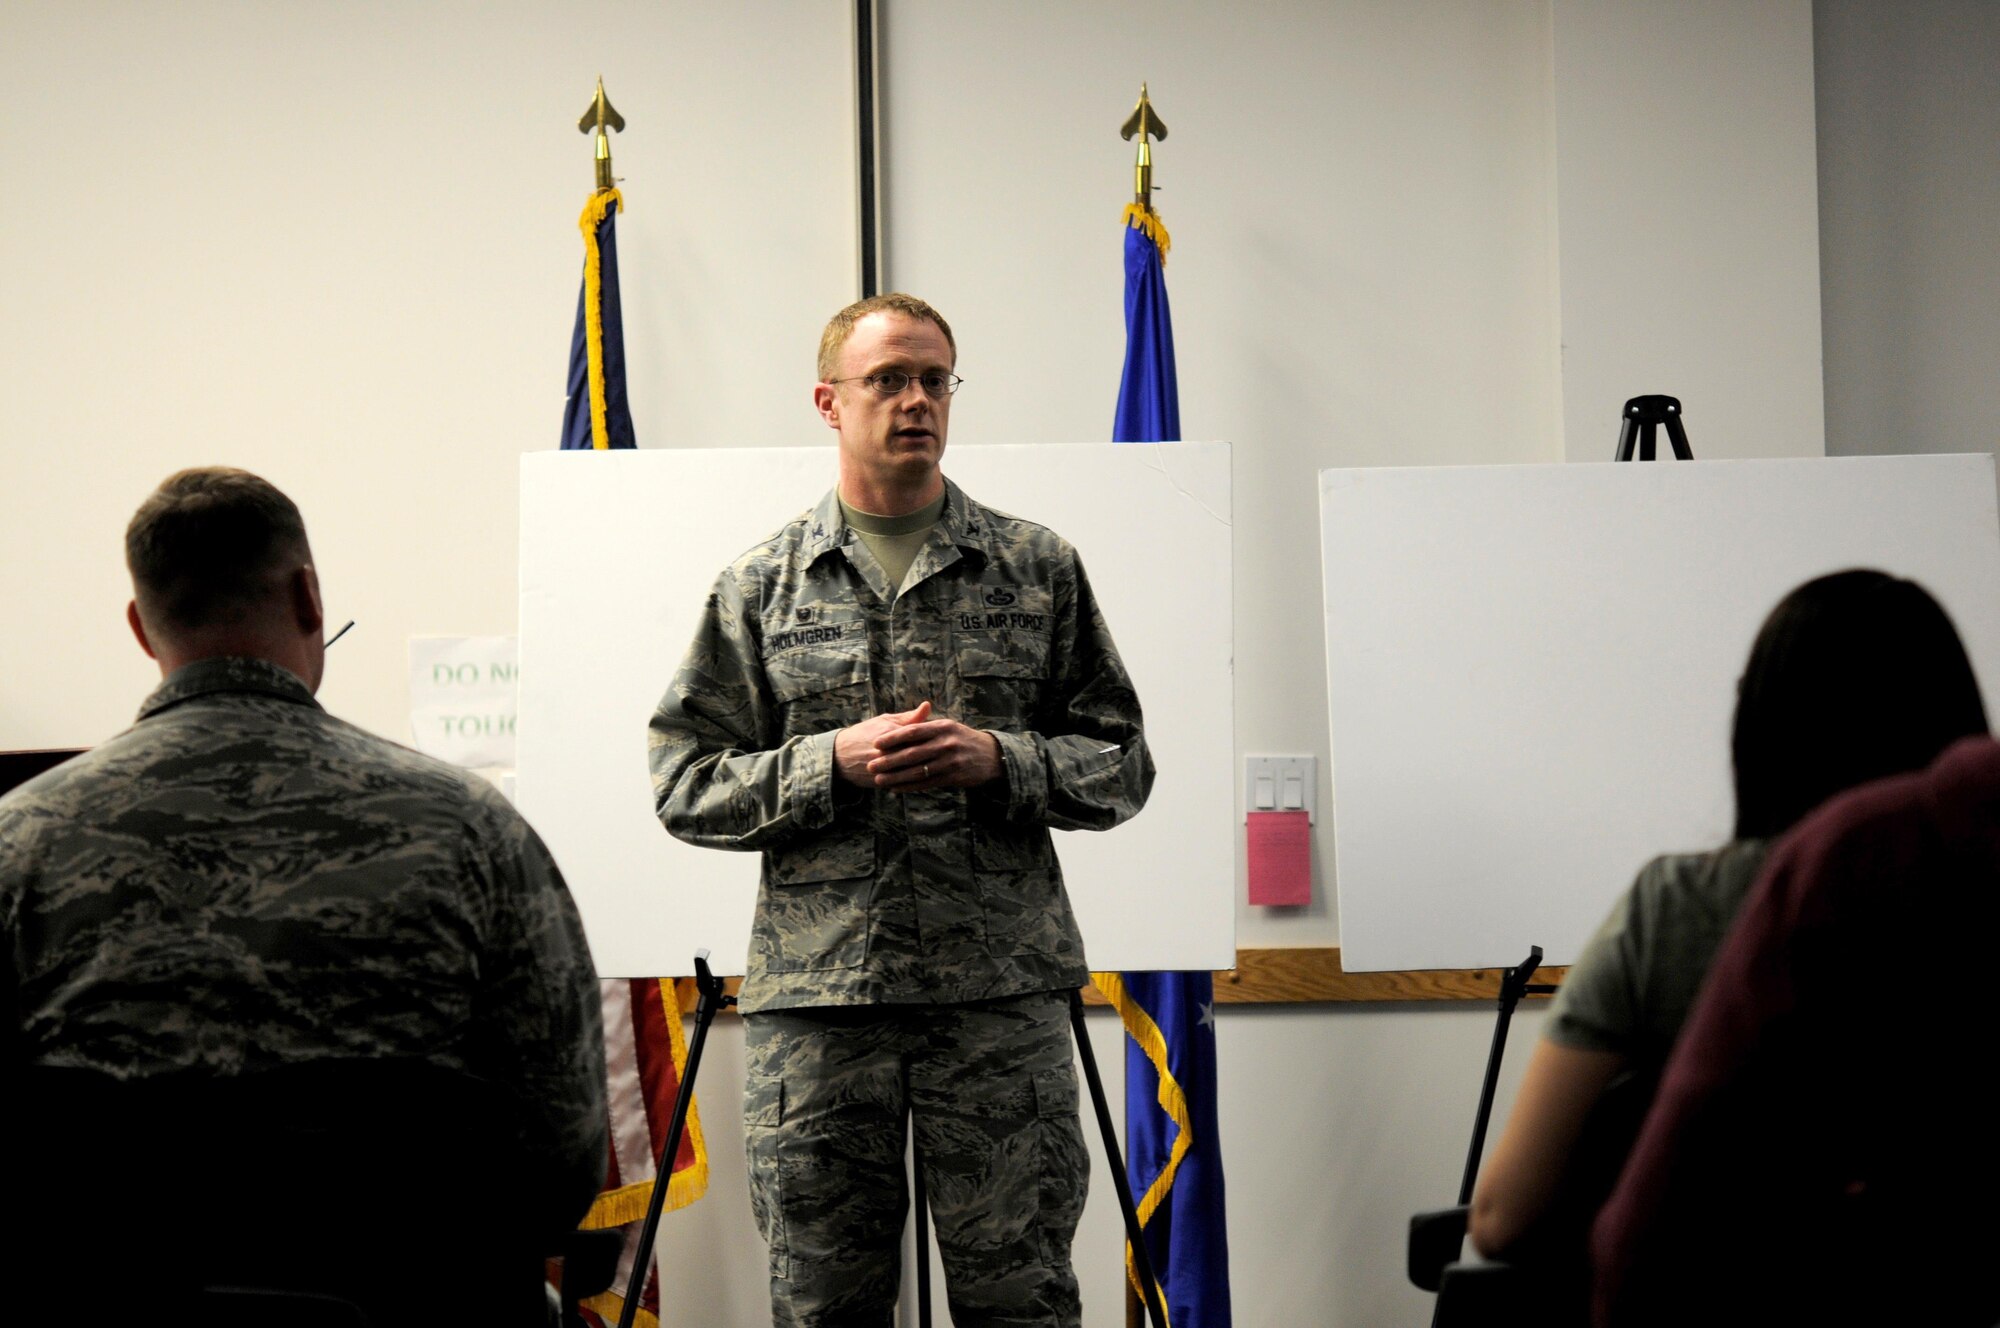 Col. Jacob J. Holmgren, the 548th Intelligence, Surveillance and Reconnaissance Group commander, briefs Airmen and their families about the day-to-day operations of the Distributed Ground Station-2 at an open house hosted by the 548th ISR Group at Beale Air Force Base, on April 13, 2016. The 548th ISR Group opened their doors, allowing family members to get an inside look at the work their Airmen do on a daily basis. (U.S. Air Force photo by Airman 1st Class Taylor A. Workman)